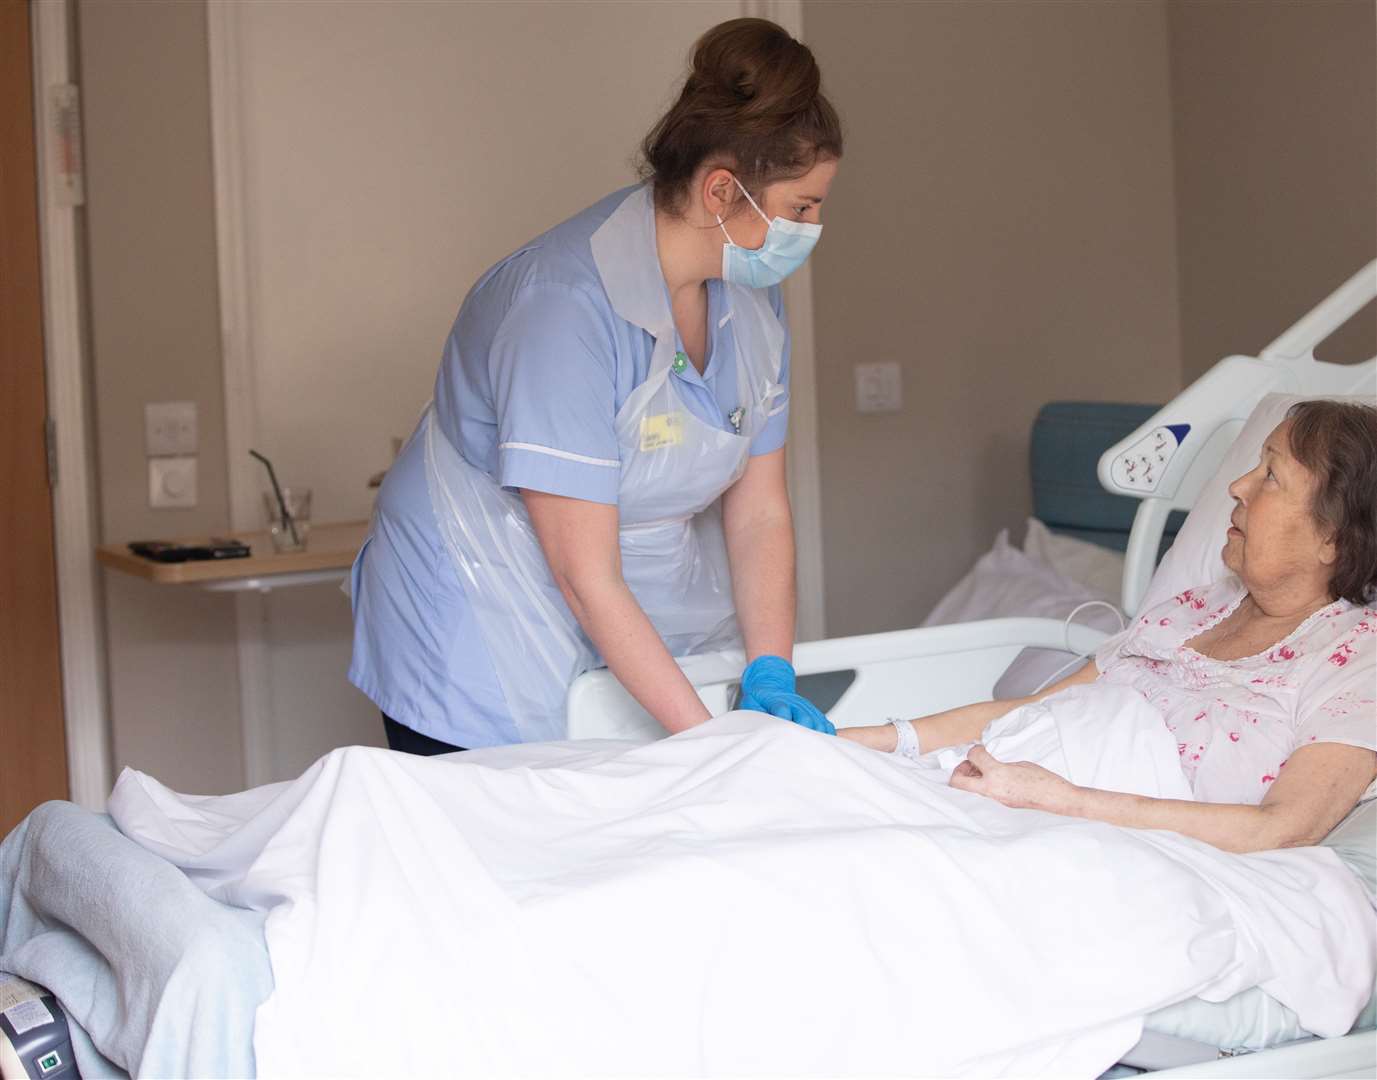 The Heart of Kent Hospice cares for anyone in the community living with a terminal illness, ensuring patients and the people closest to them receive specialist compassionate care.